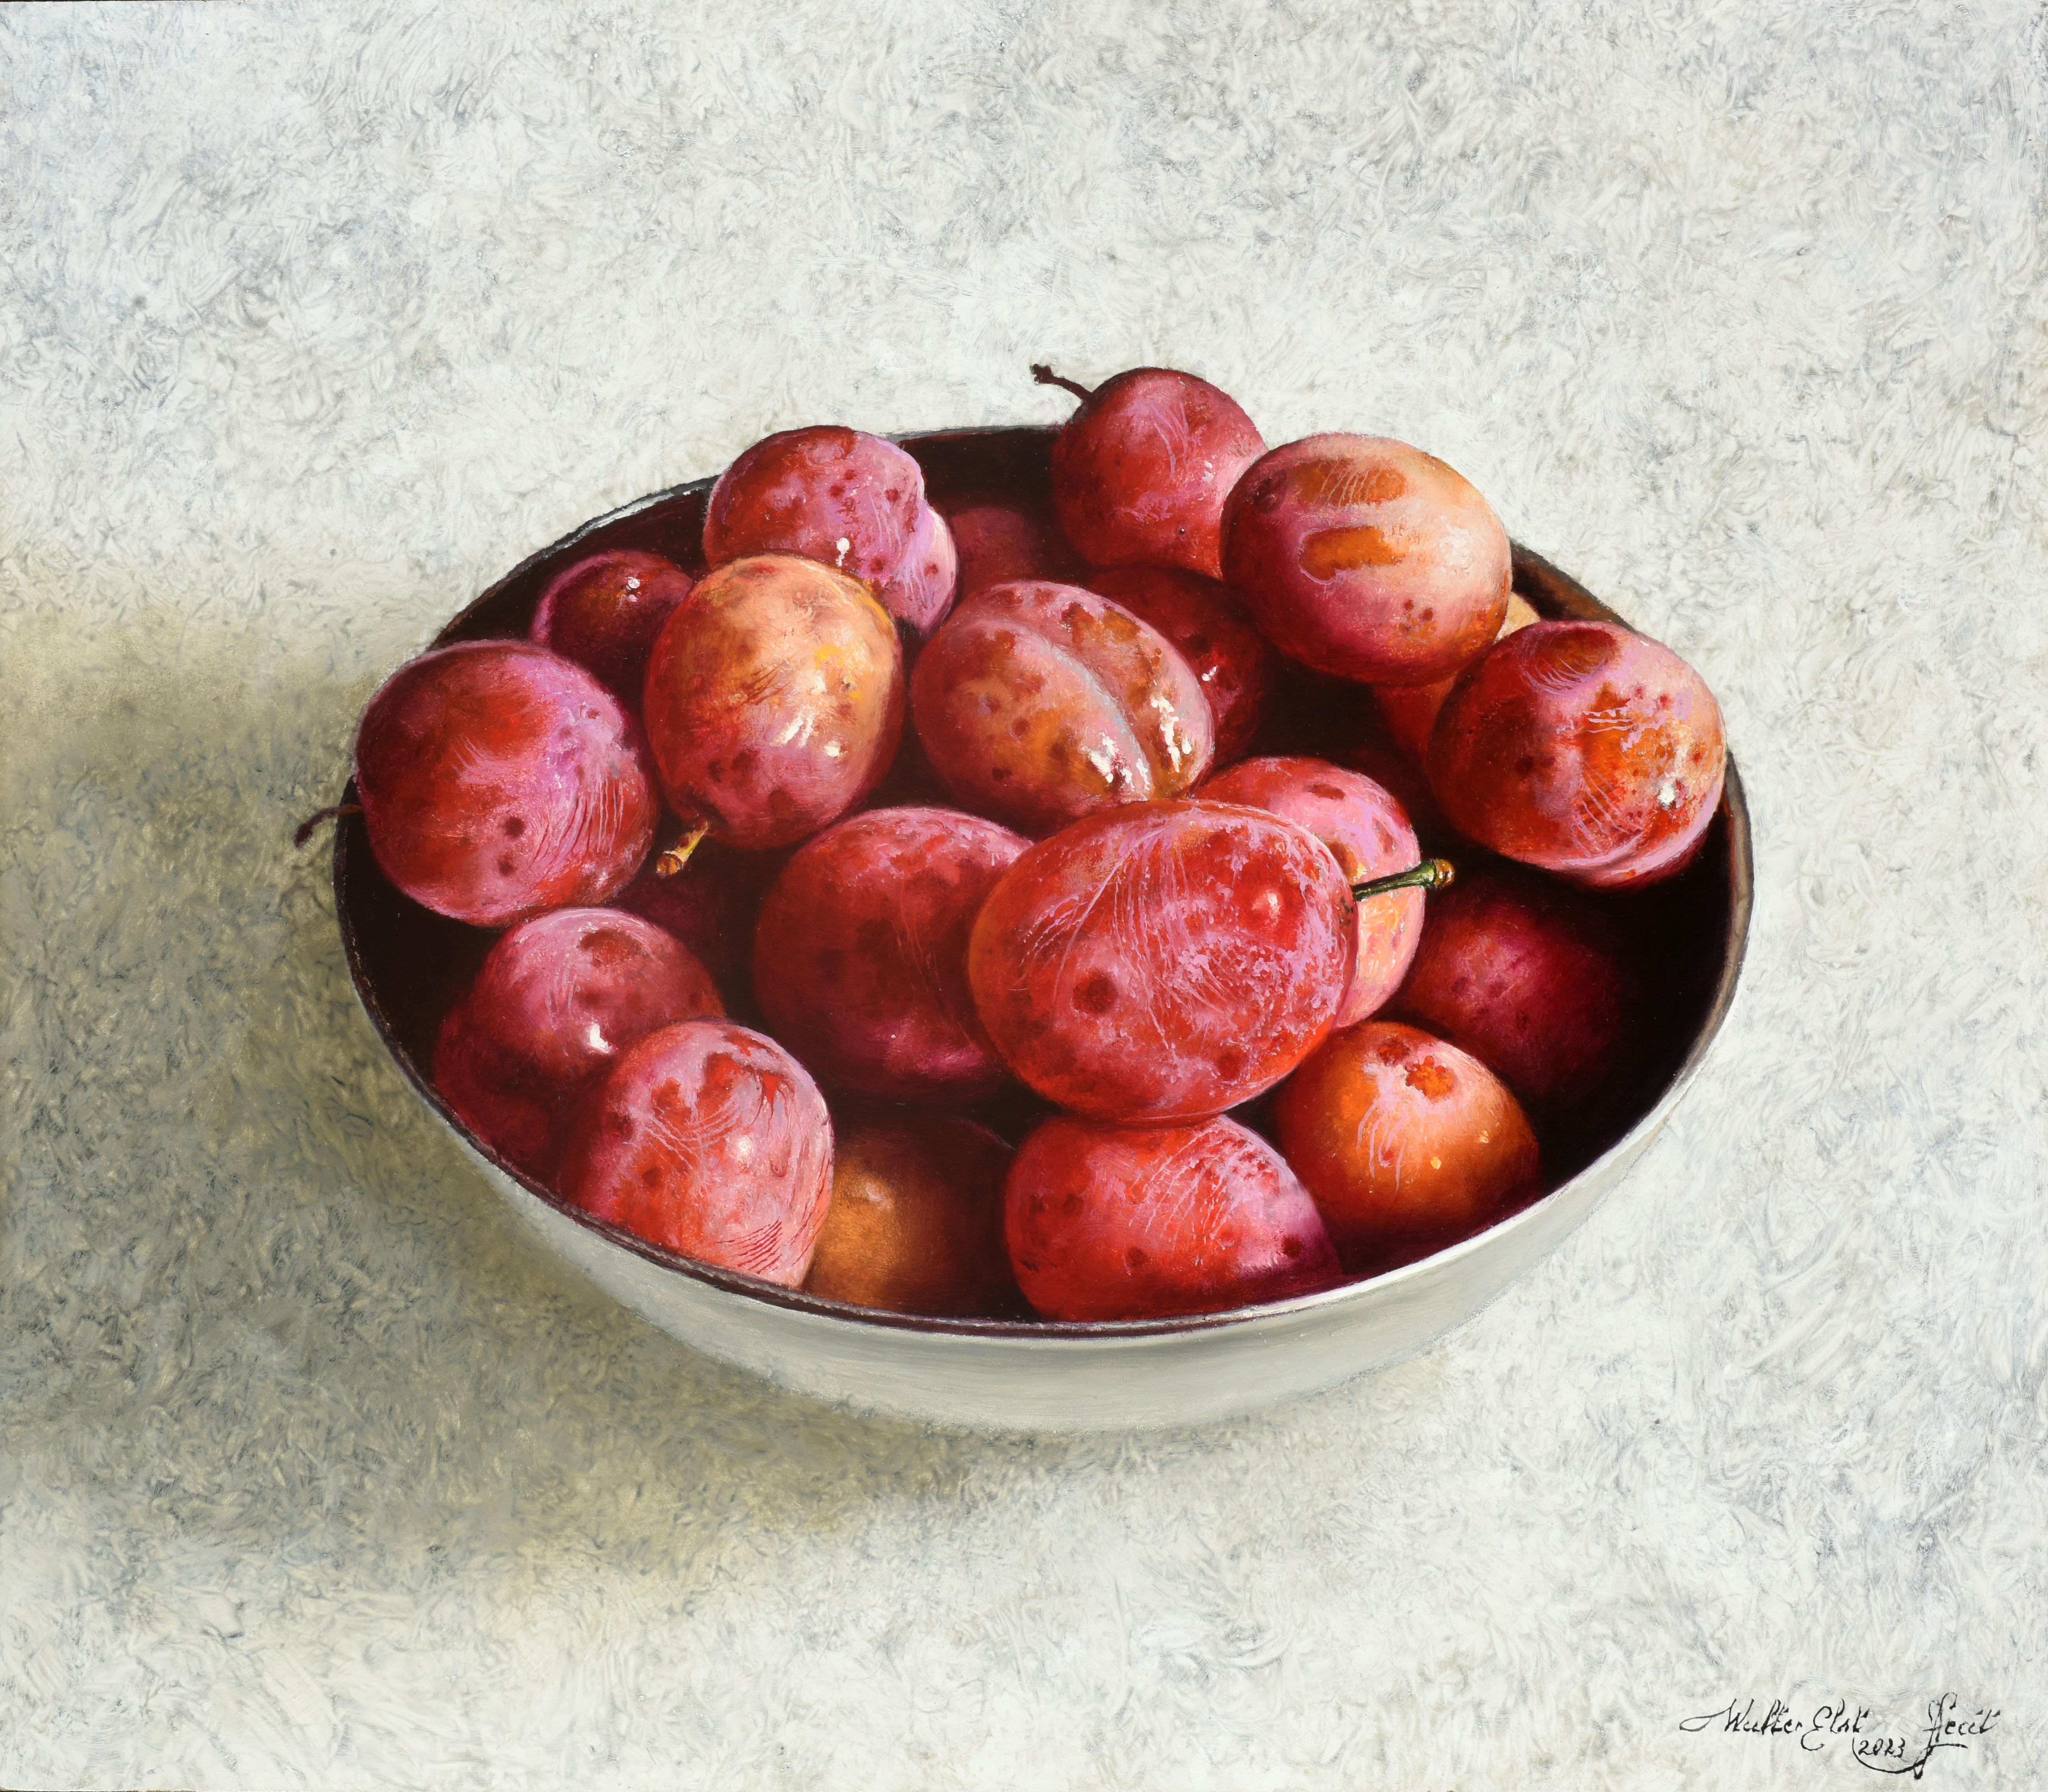 Een Mooie Oogst Oil Painting on Panel Beautiful Crop Prunes In Stock -Sizes are without frame

Walter Elst Born in Antwerp, Belgium - 1955  After finishing his study Medicine at the University of Brussels Walter Elst decided to dedicate himself to